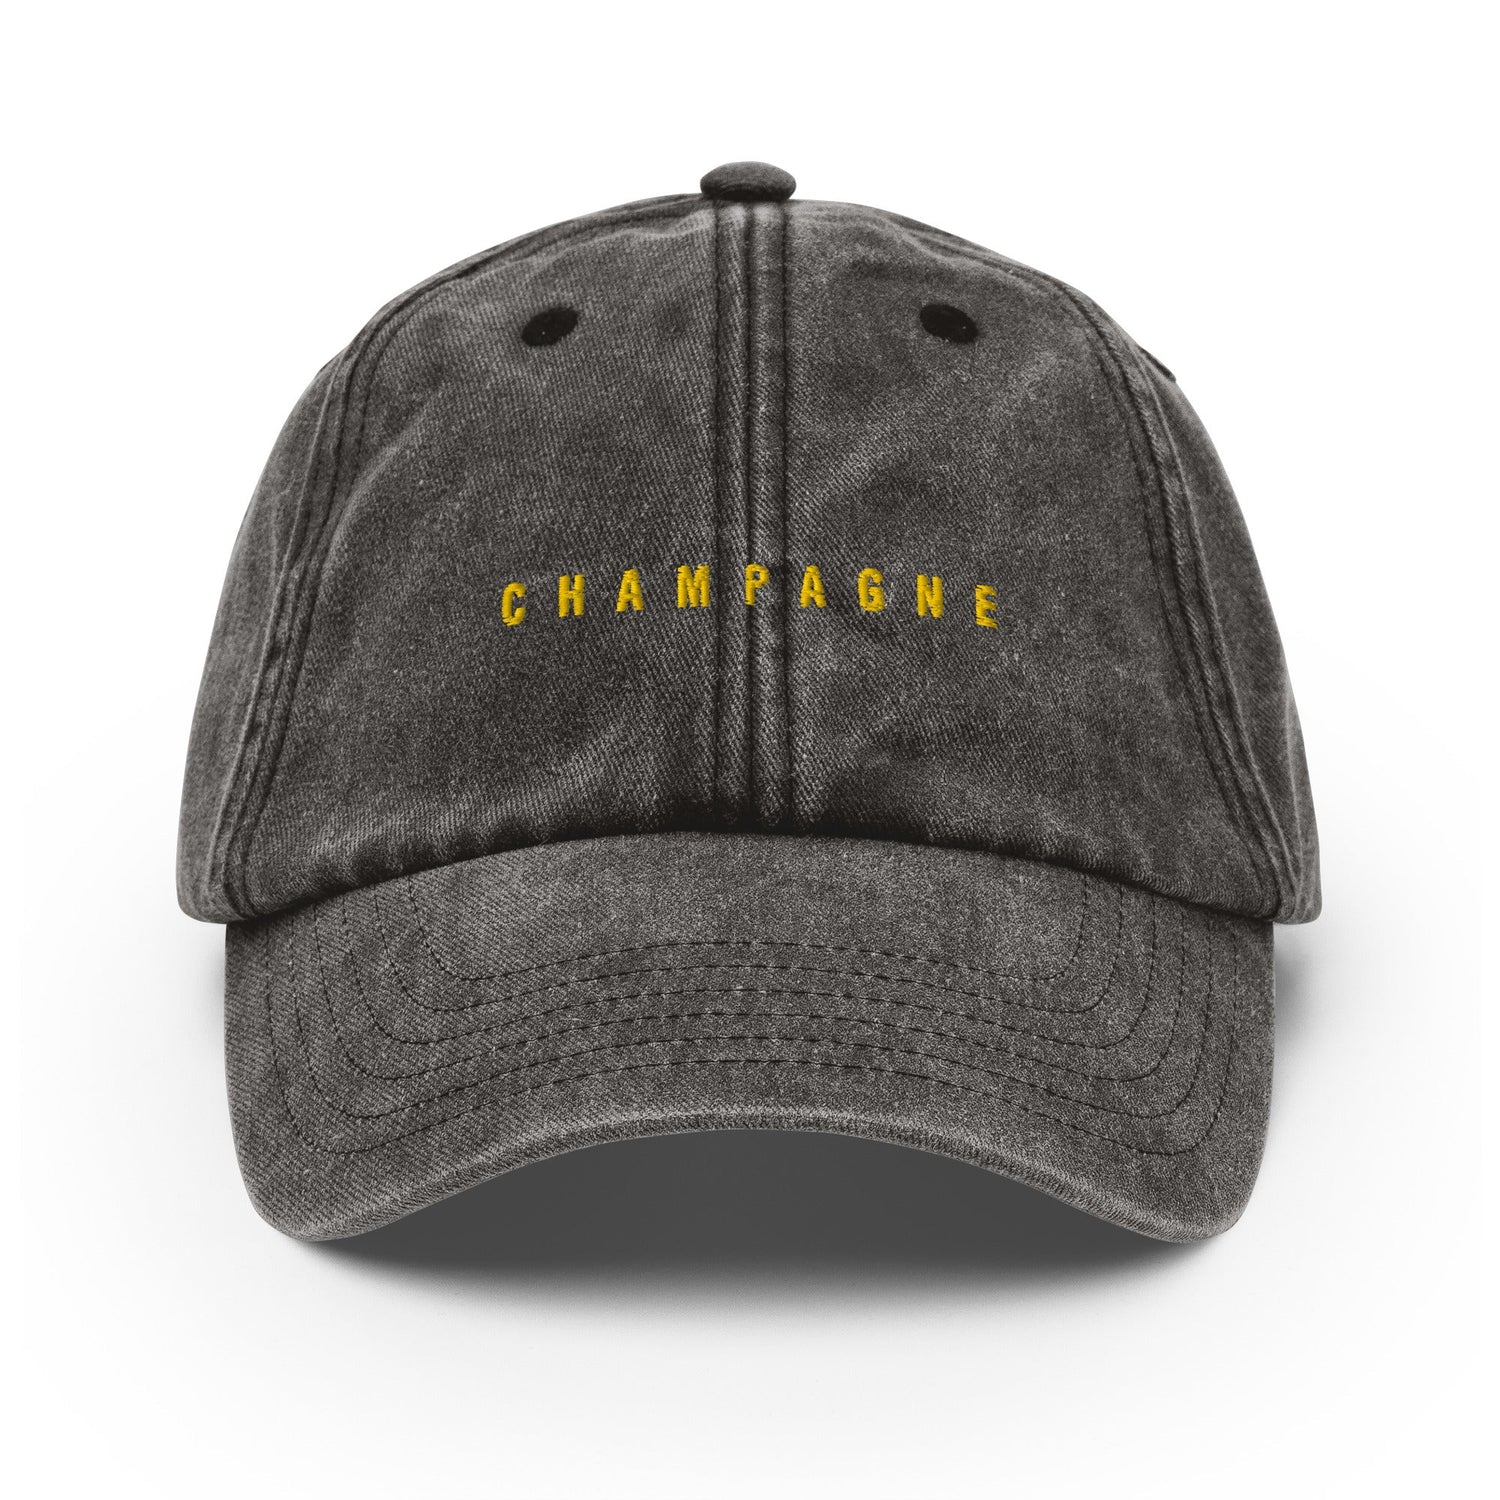 The Champagne Vintage Hat